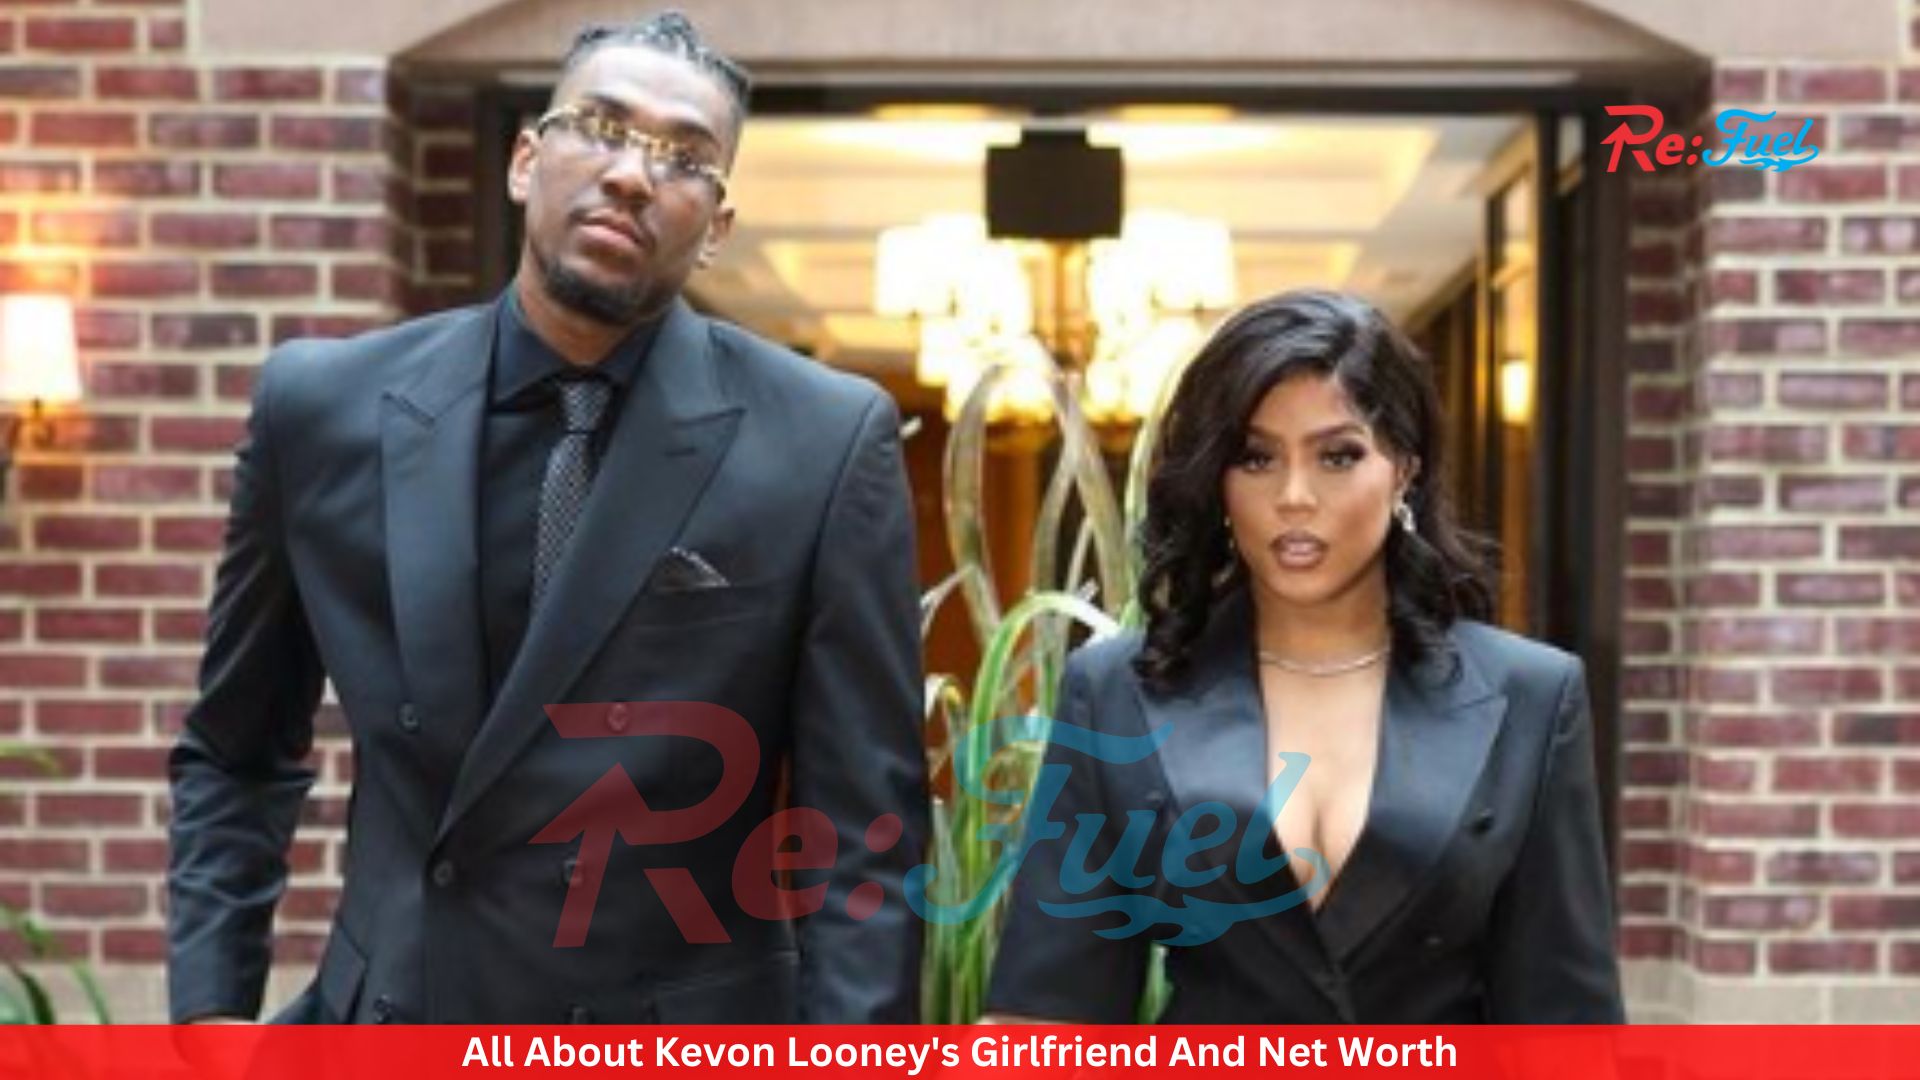 All About Kevon Looney's Girlfriend And Net Worth